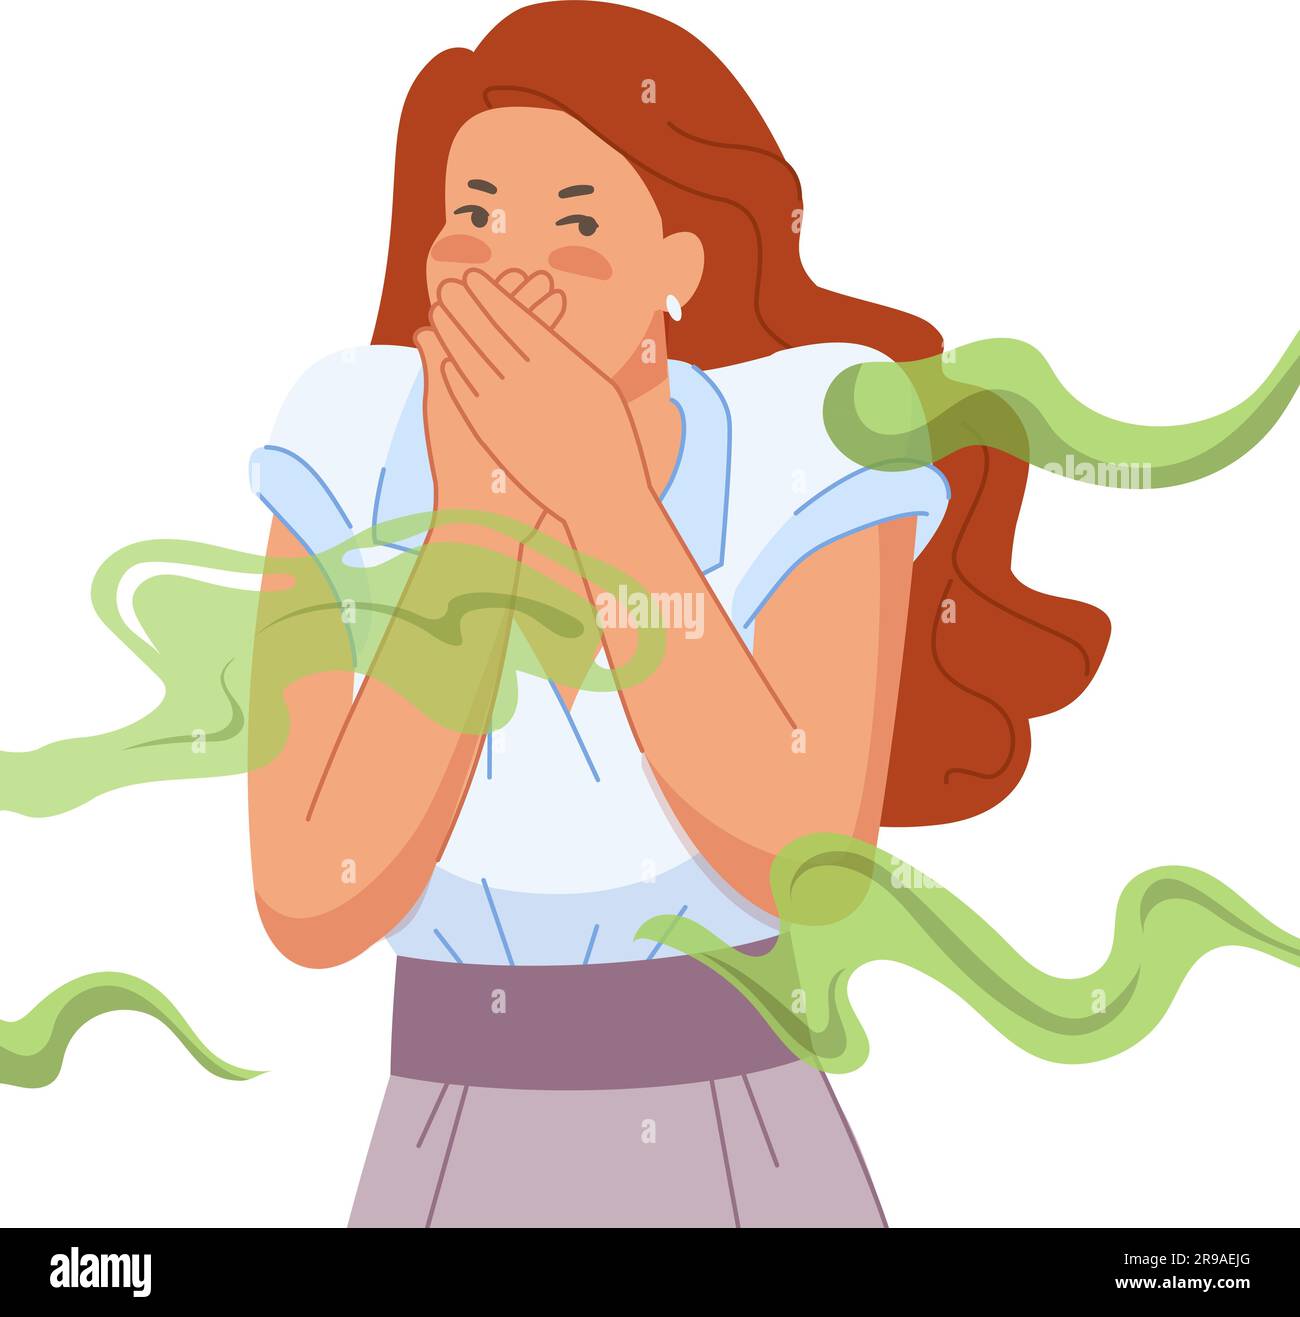 Woman bad smell. Girl cover nose and mouth from disgusted smelly odor, female disgust expression to unpleasant scent of fart stinky breath sweat or toxic smoke vector illustration of smell girl Stock Vector